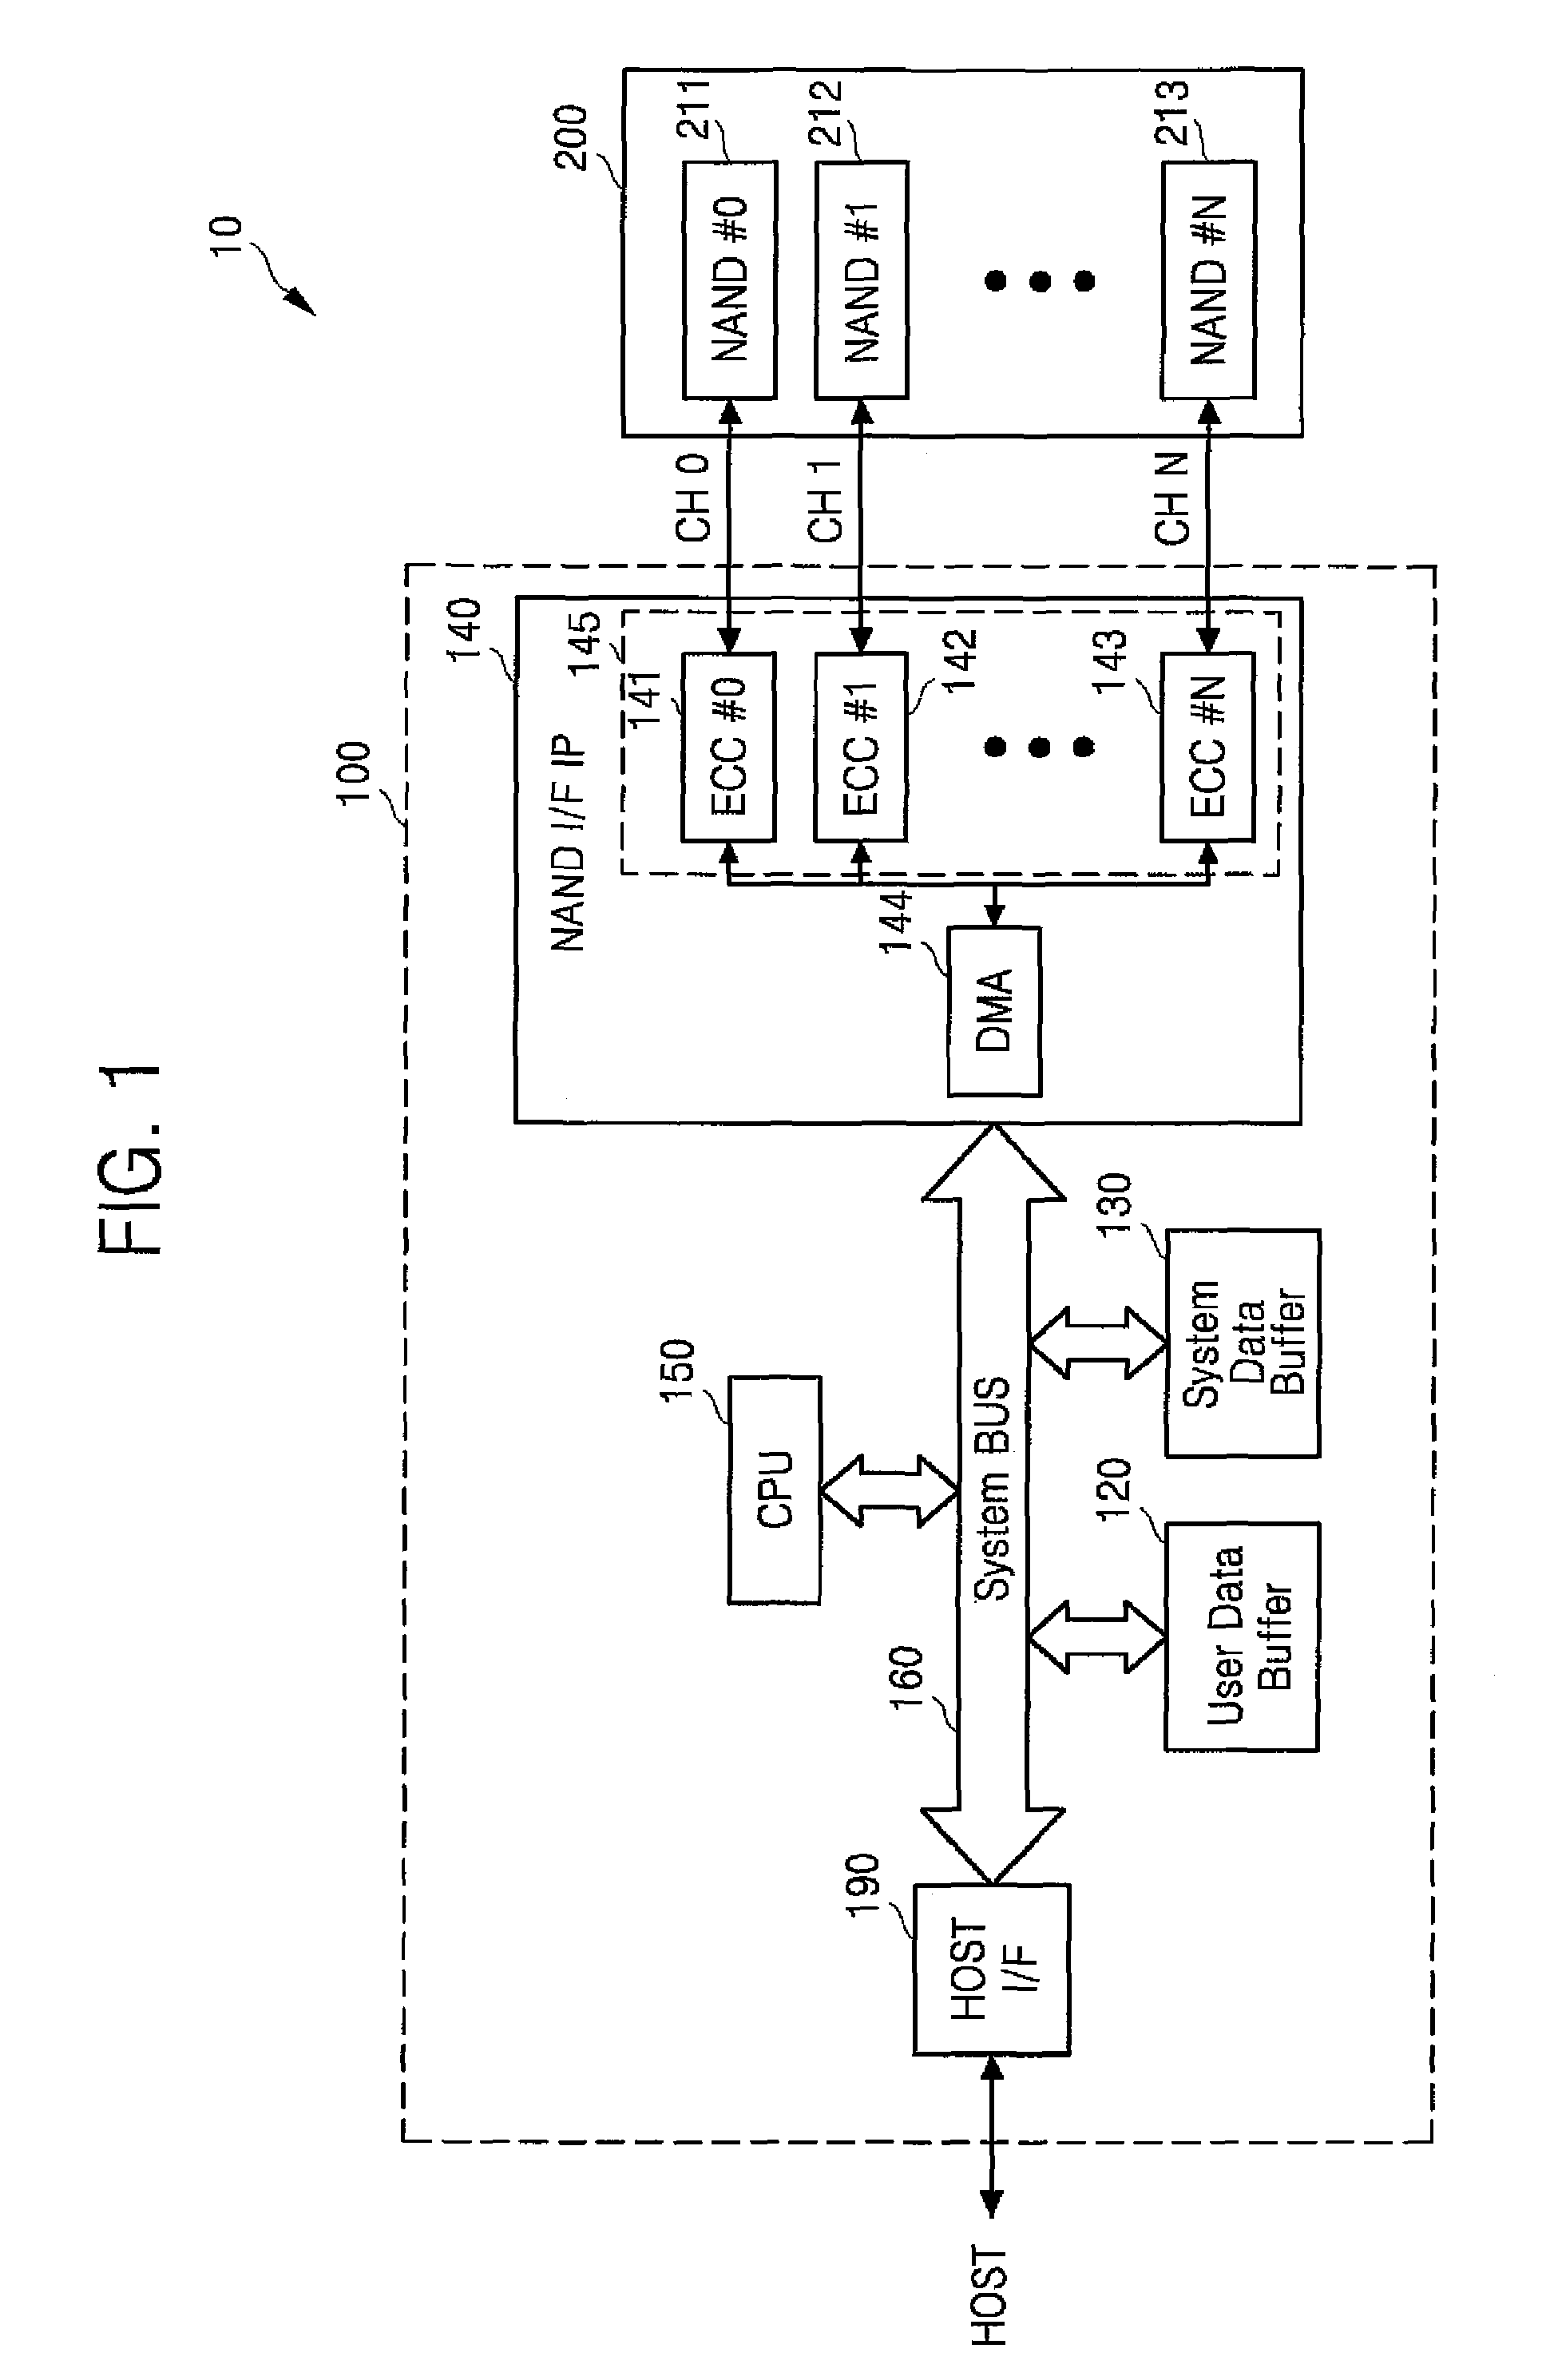 Multi-channel memory system including error correction decoder architecture with efficient area utilization